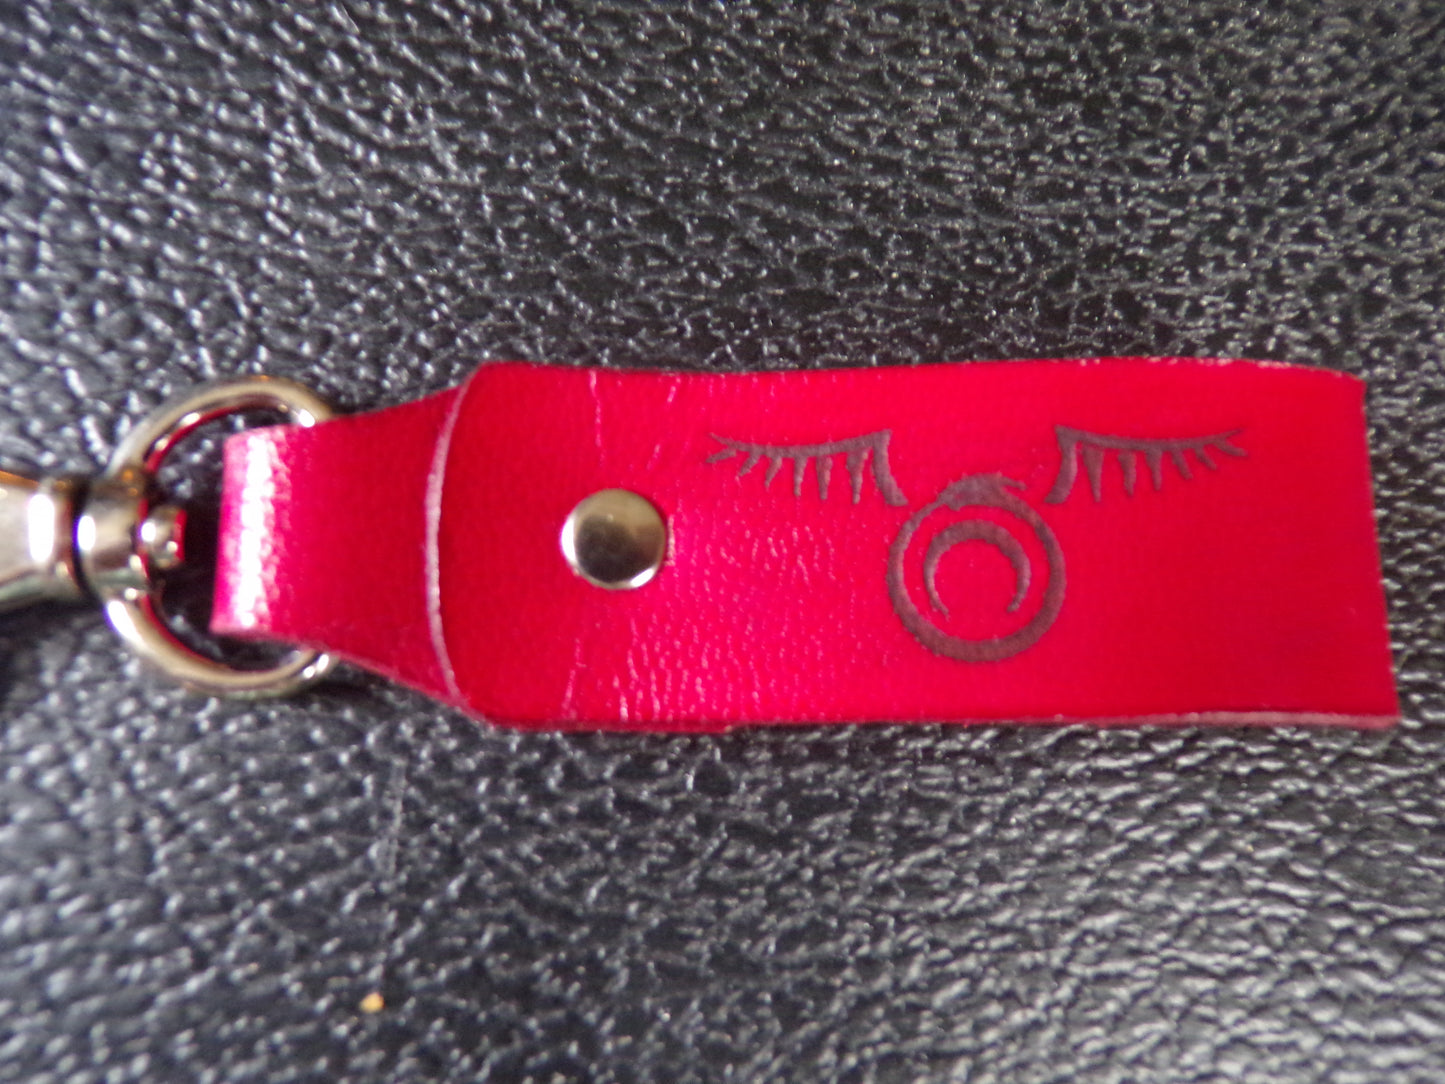 Styx Belt Keychain Clank & Ouroboros w/wings Red leather